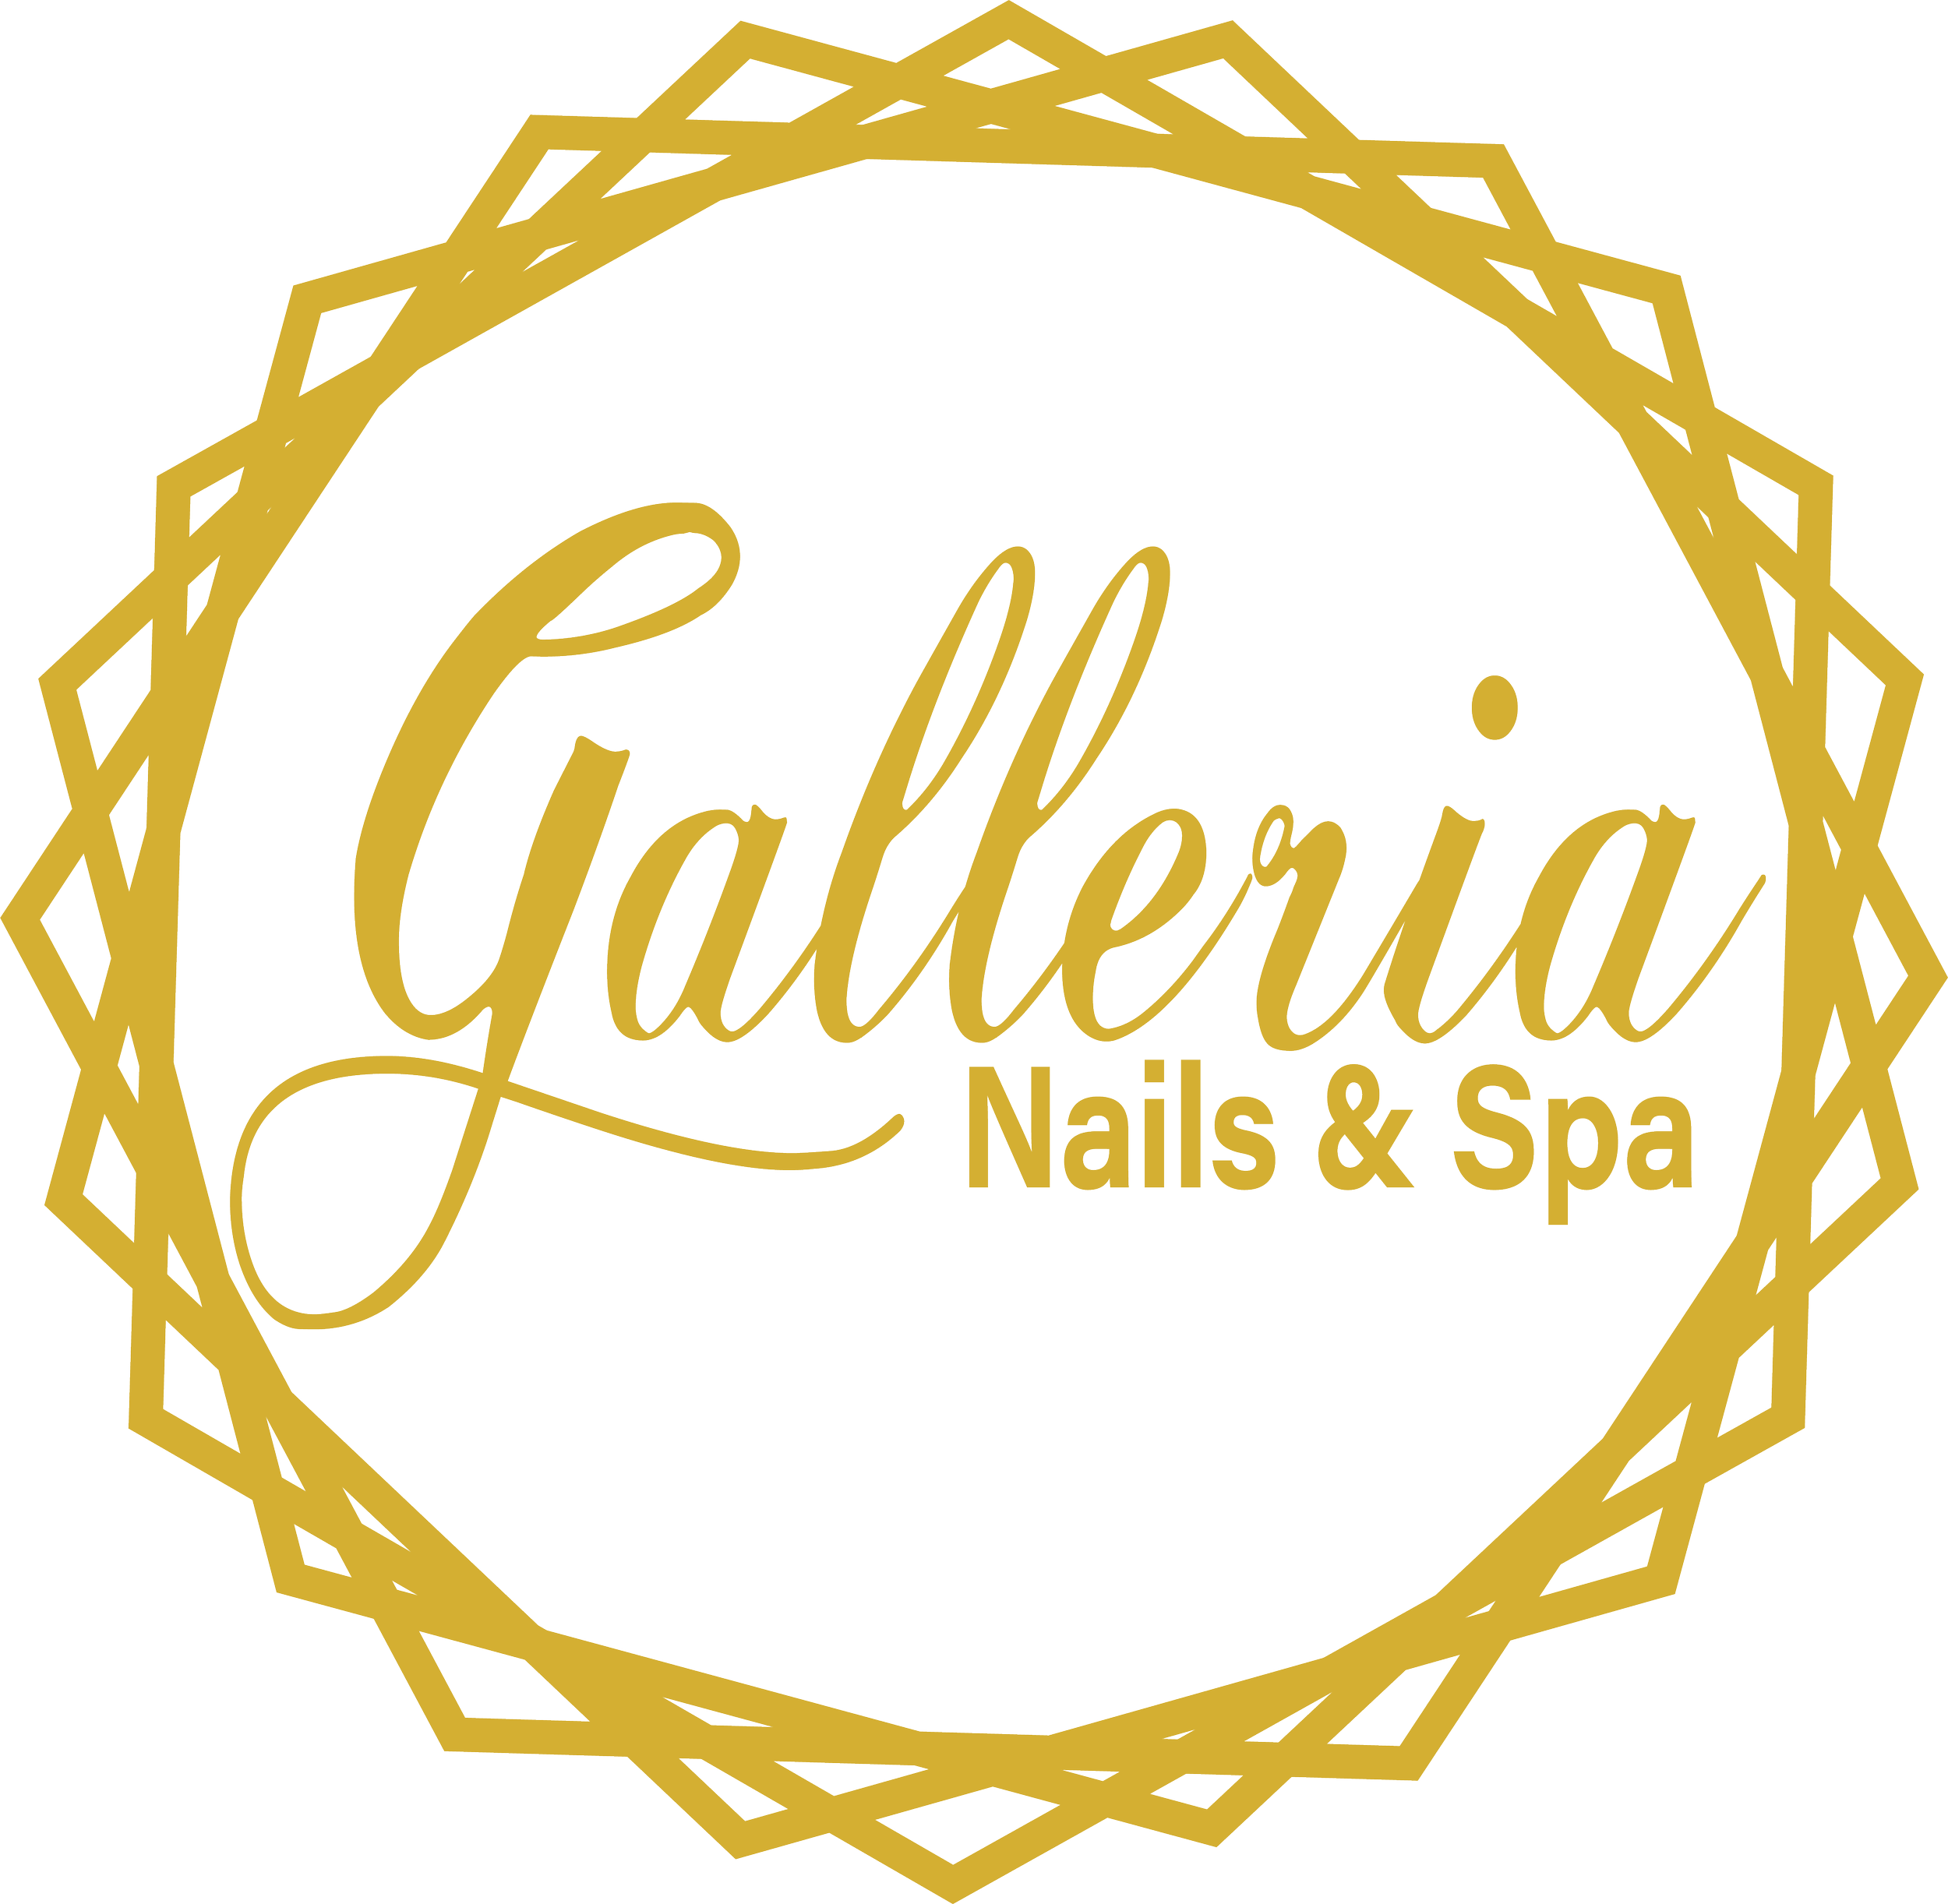 Milano Nail Spa Debuts at Uptown Houston Centre on Post Oak with 23 Year  Old, First Generation American at the Reins – HOT IN HOUSTON NOW